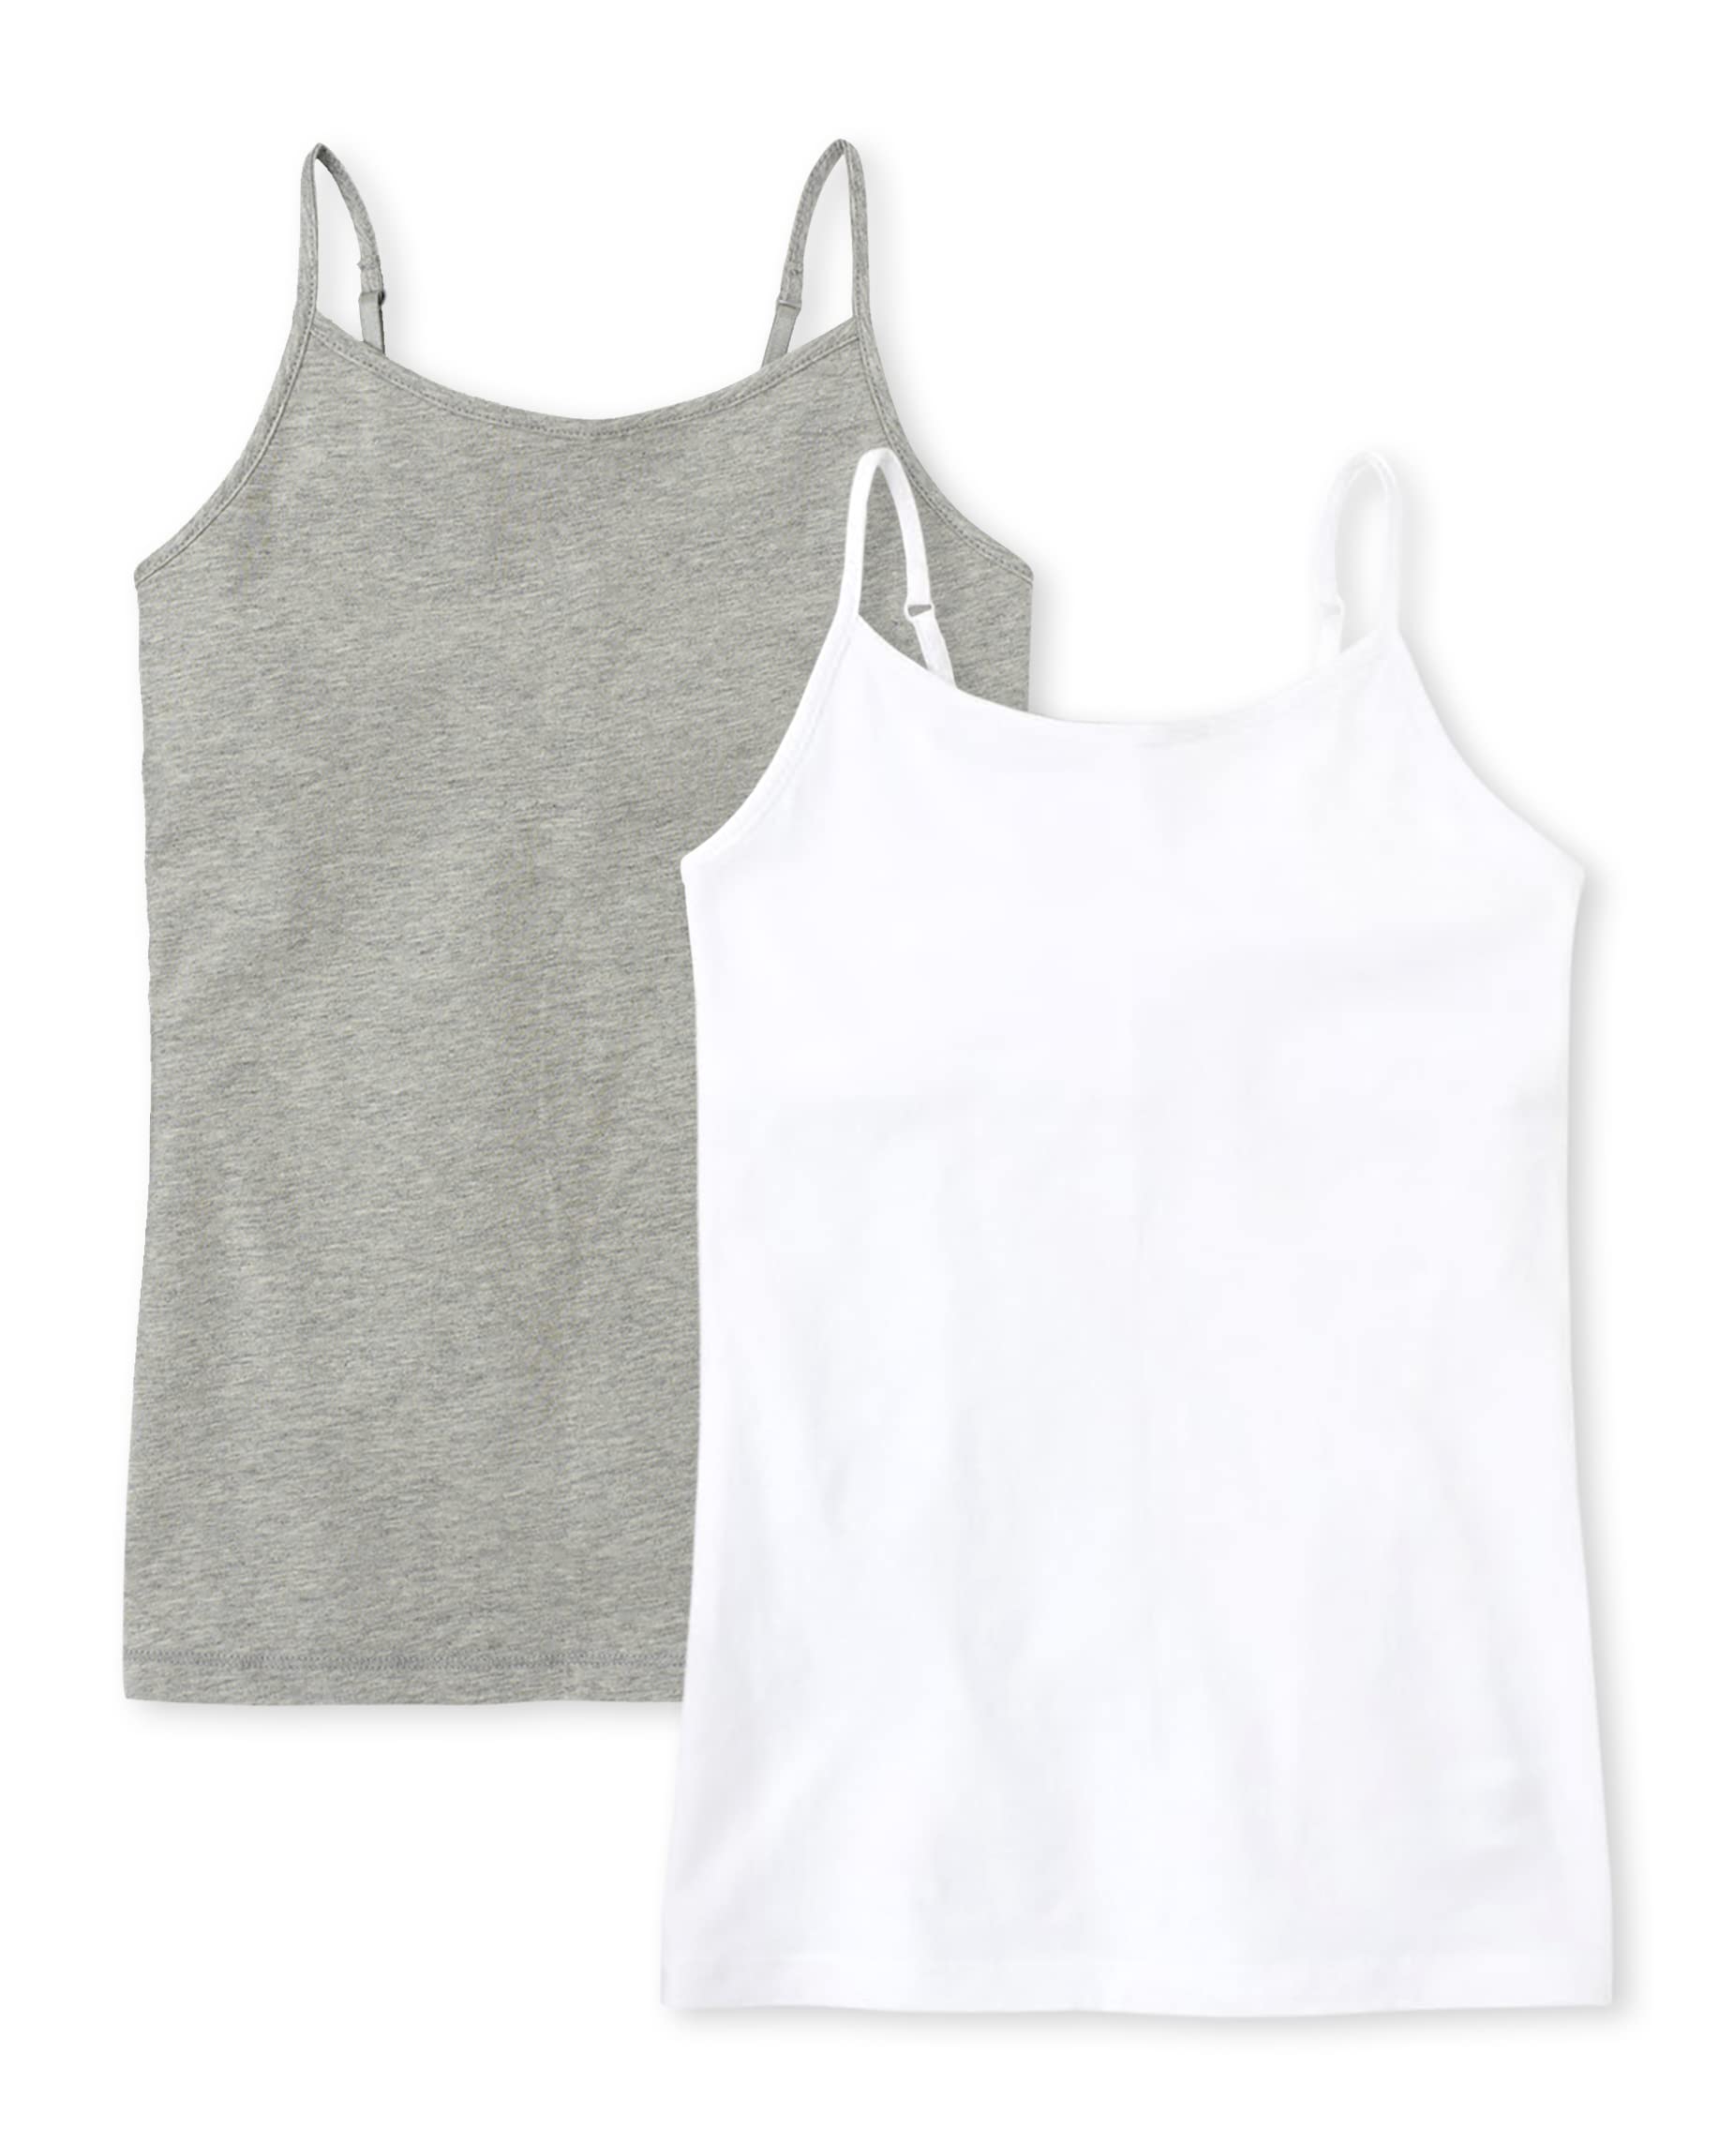 The Children's Place Girls' 2 Pack Basic Cami